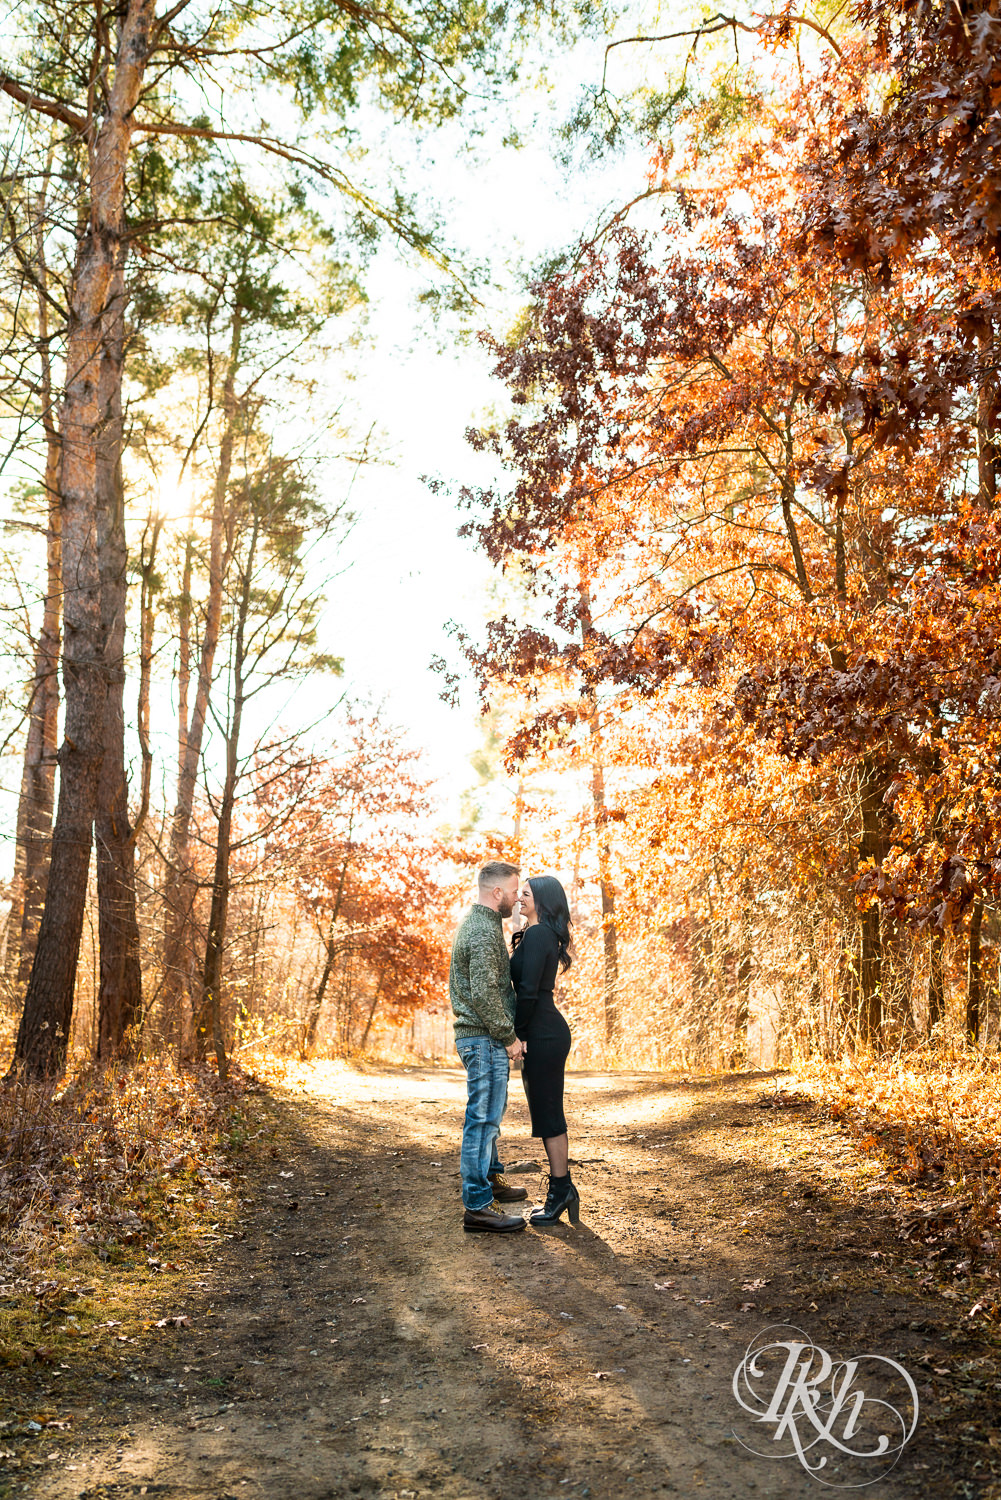 Man in sweater and jeans and woman in black dress walk kiss at Lebanon Hills Regional Park in Eagan, Minnesota for December morning engagement photography.